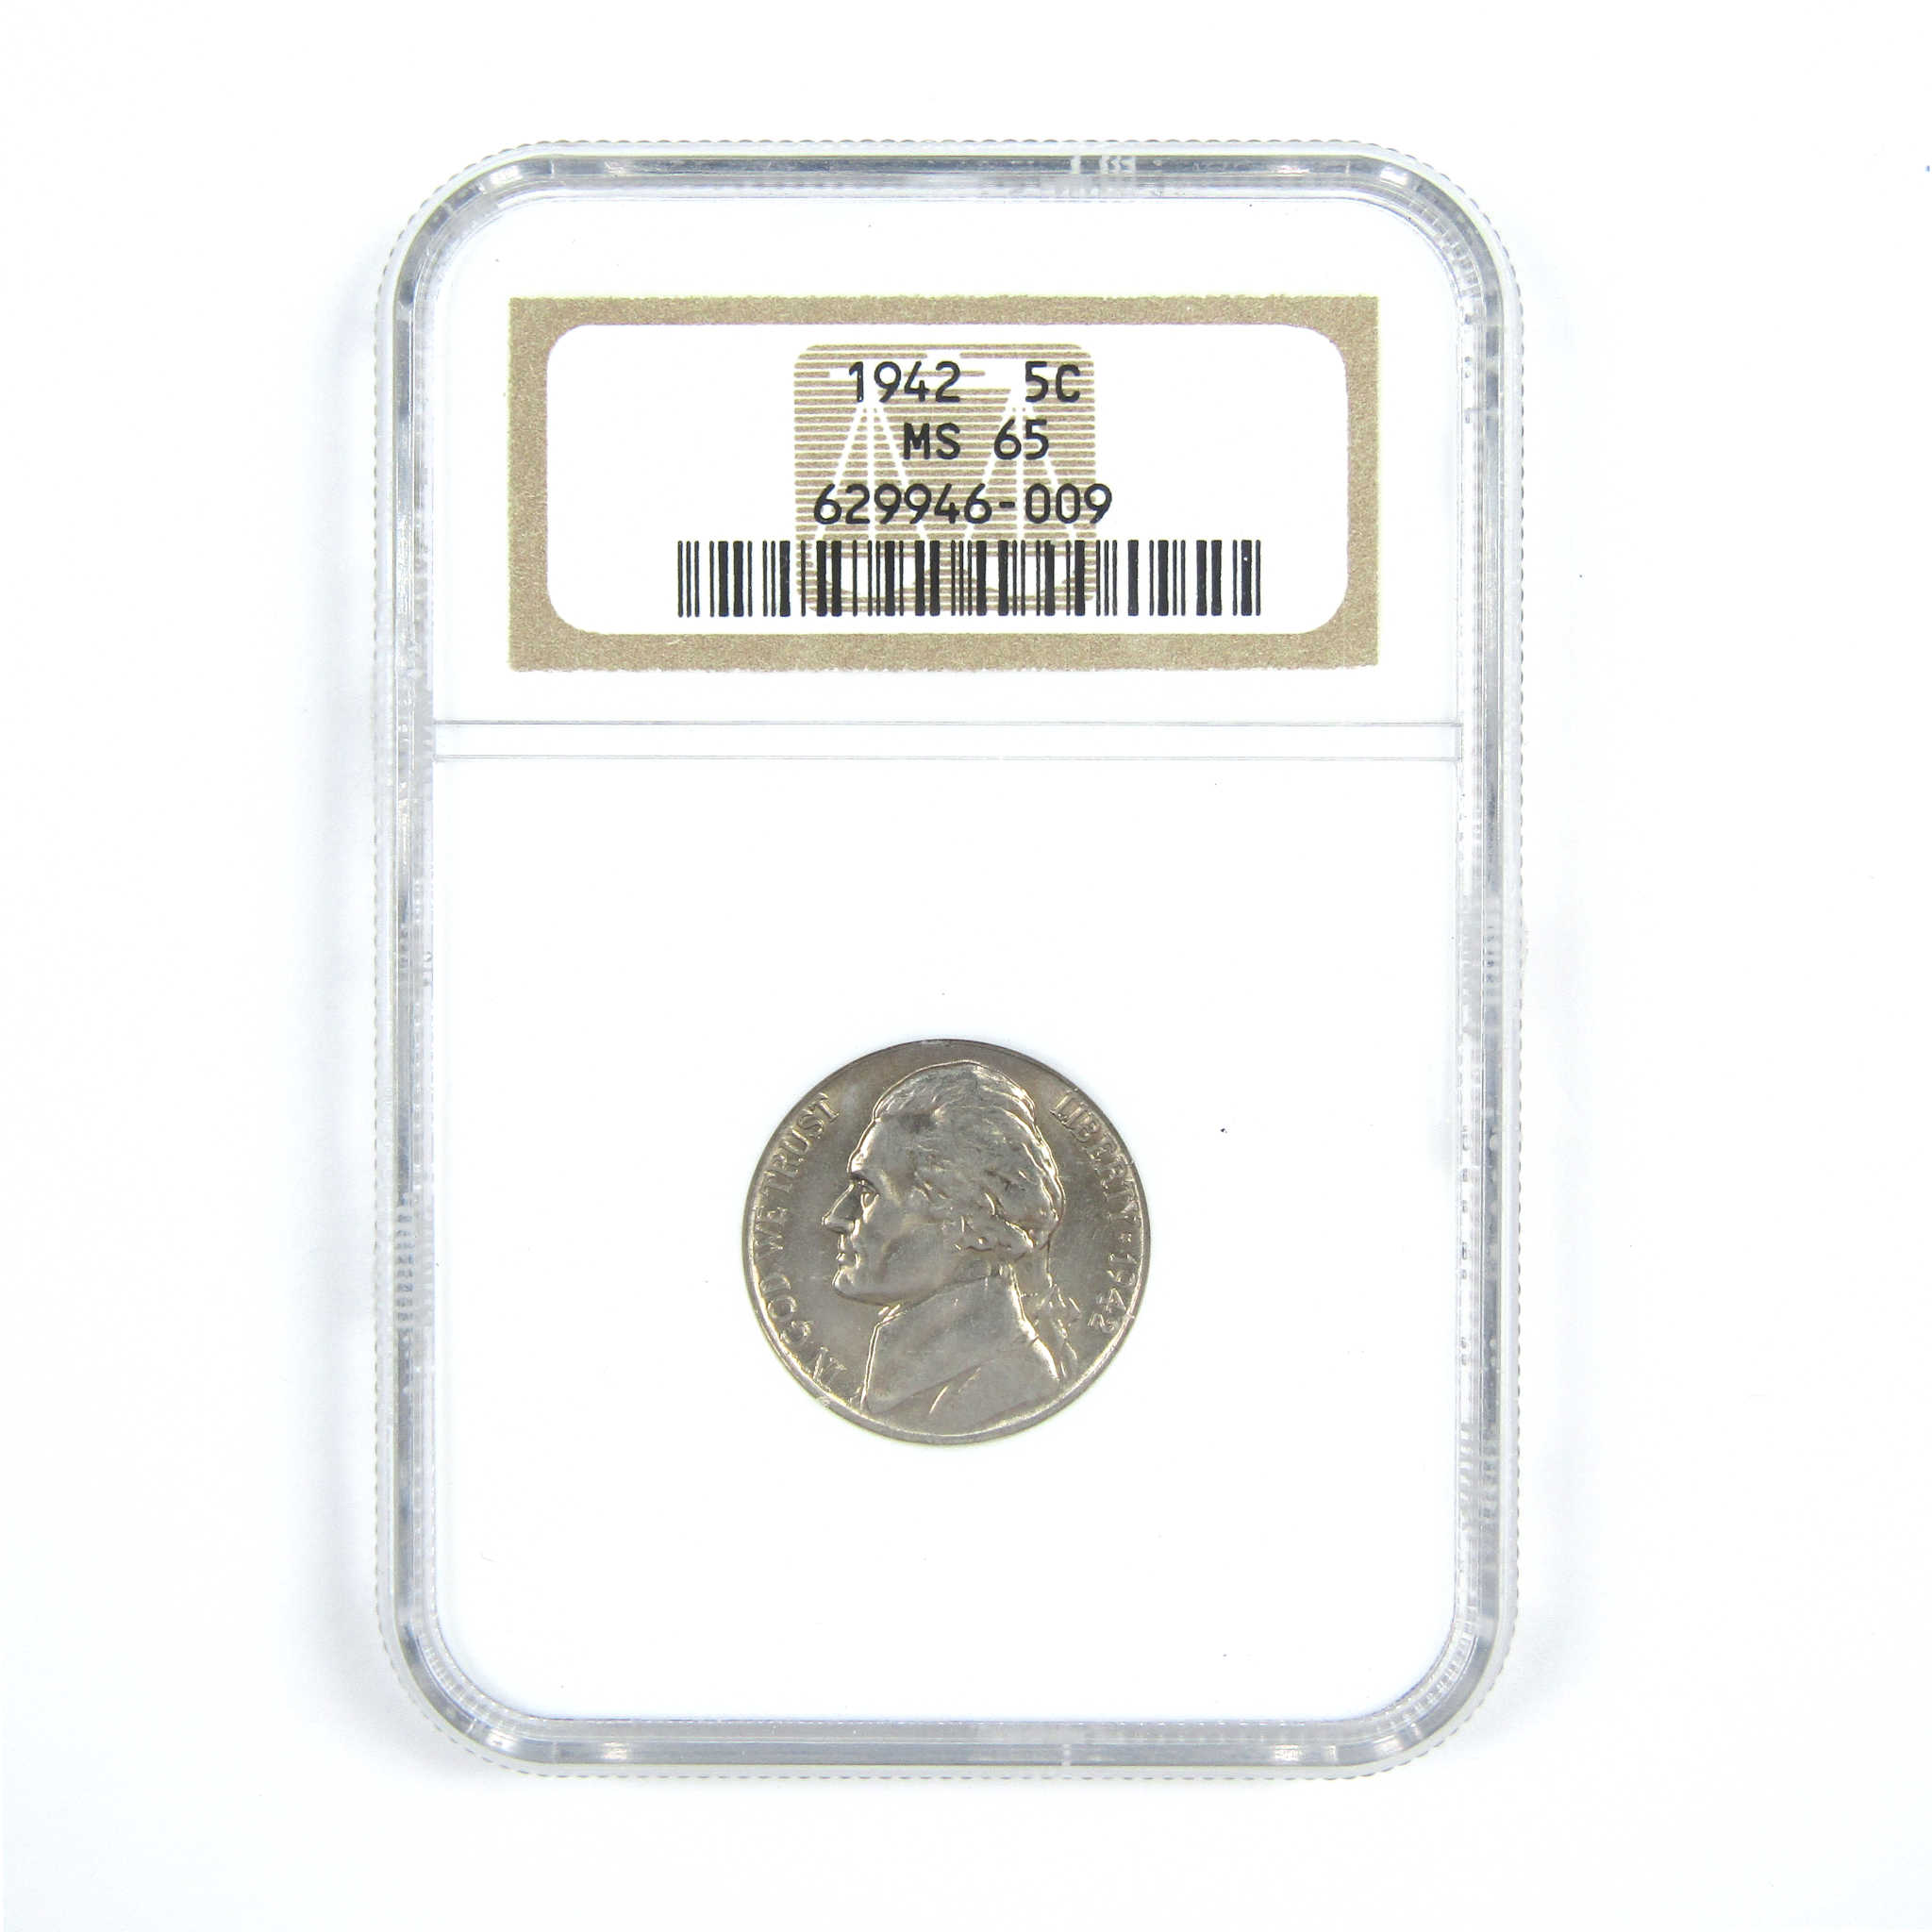 1942 Jefferson Nickel MS 65 NGC 5c Uncirculated Coin SKU:CPC7370